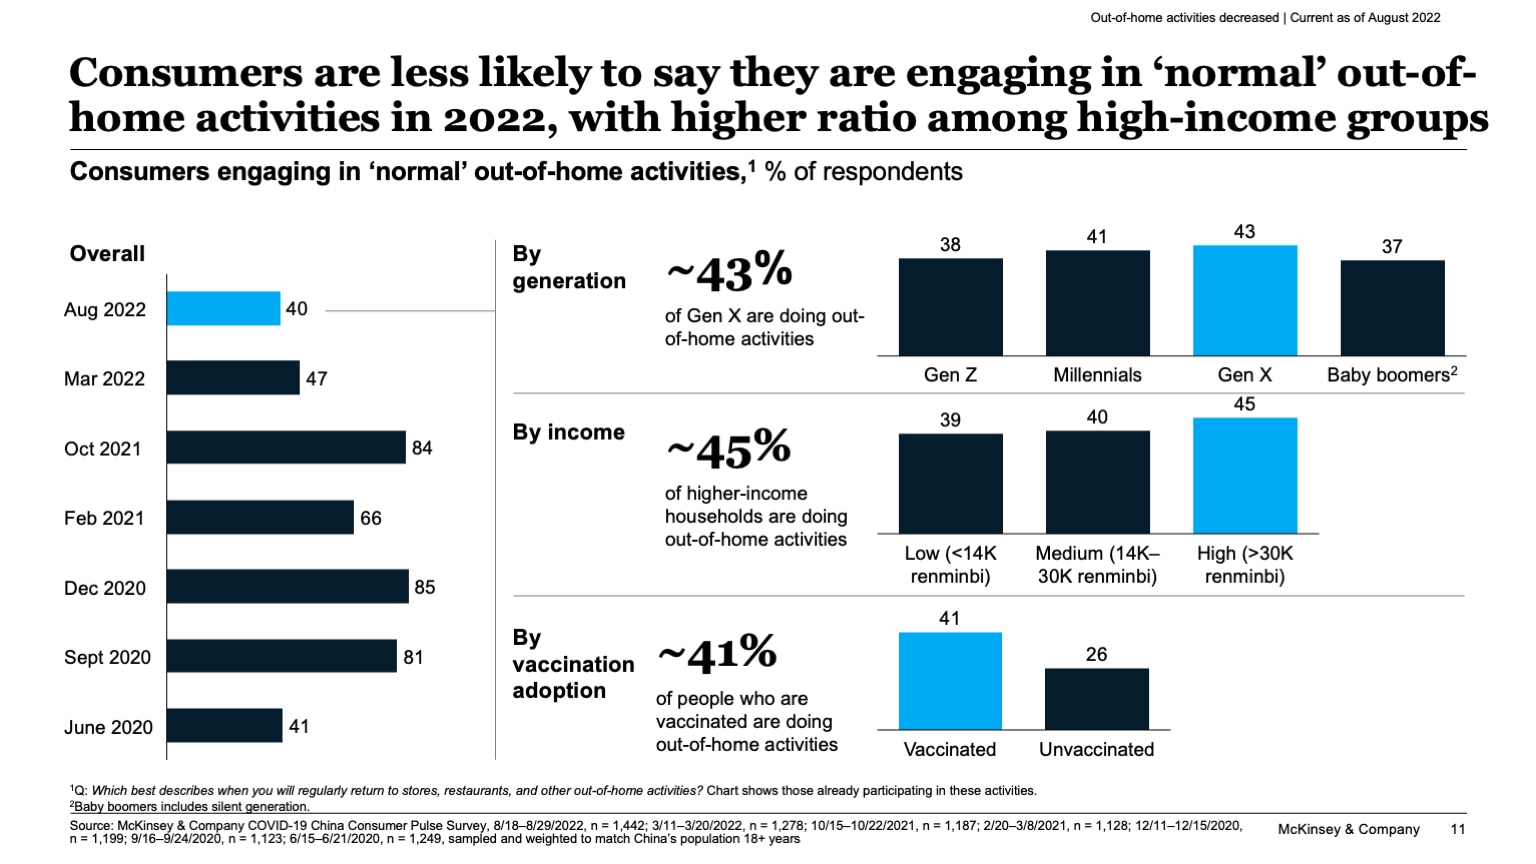 Consumers are less likely to say they are engaging in ‘normal’ out-of-home activities in 2022, with higher ratio among high-income groups